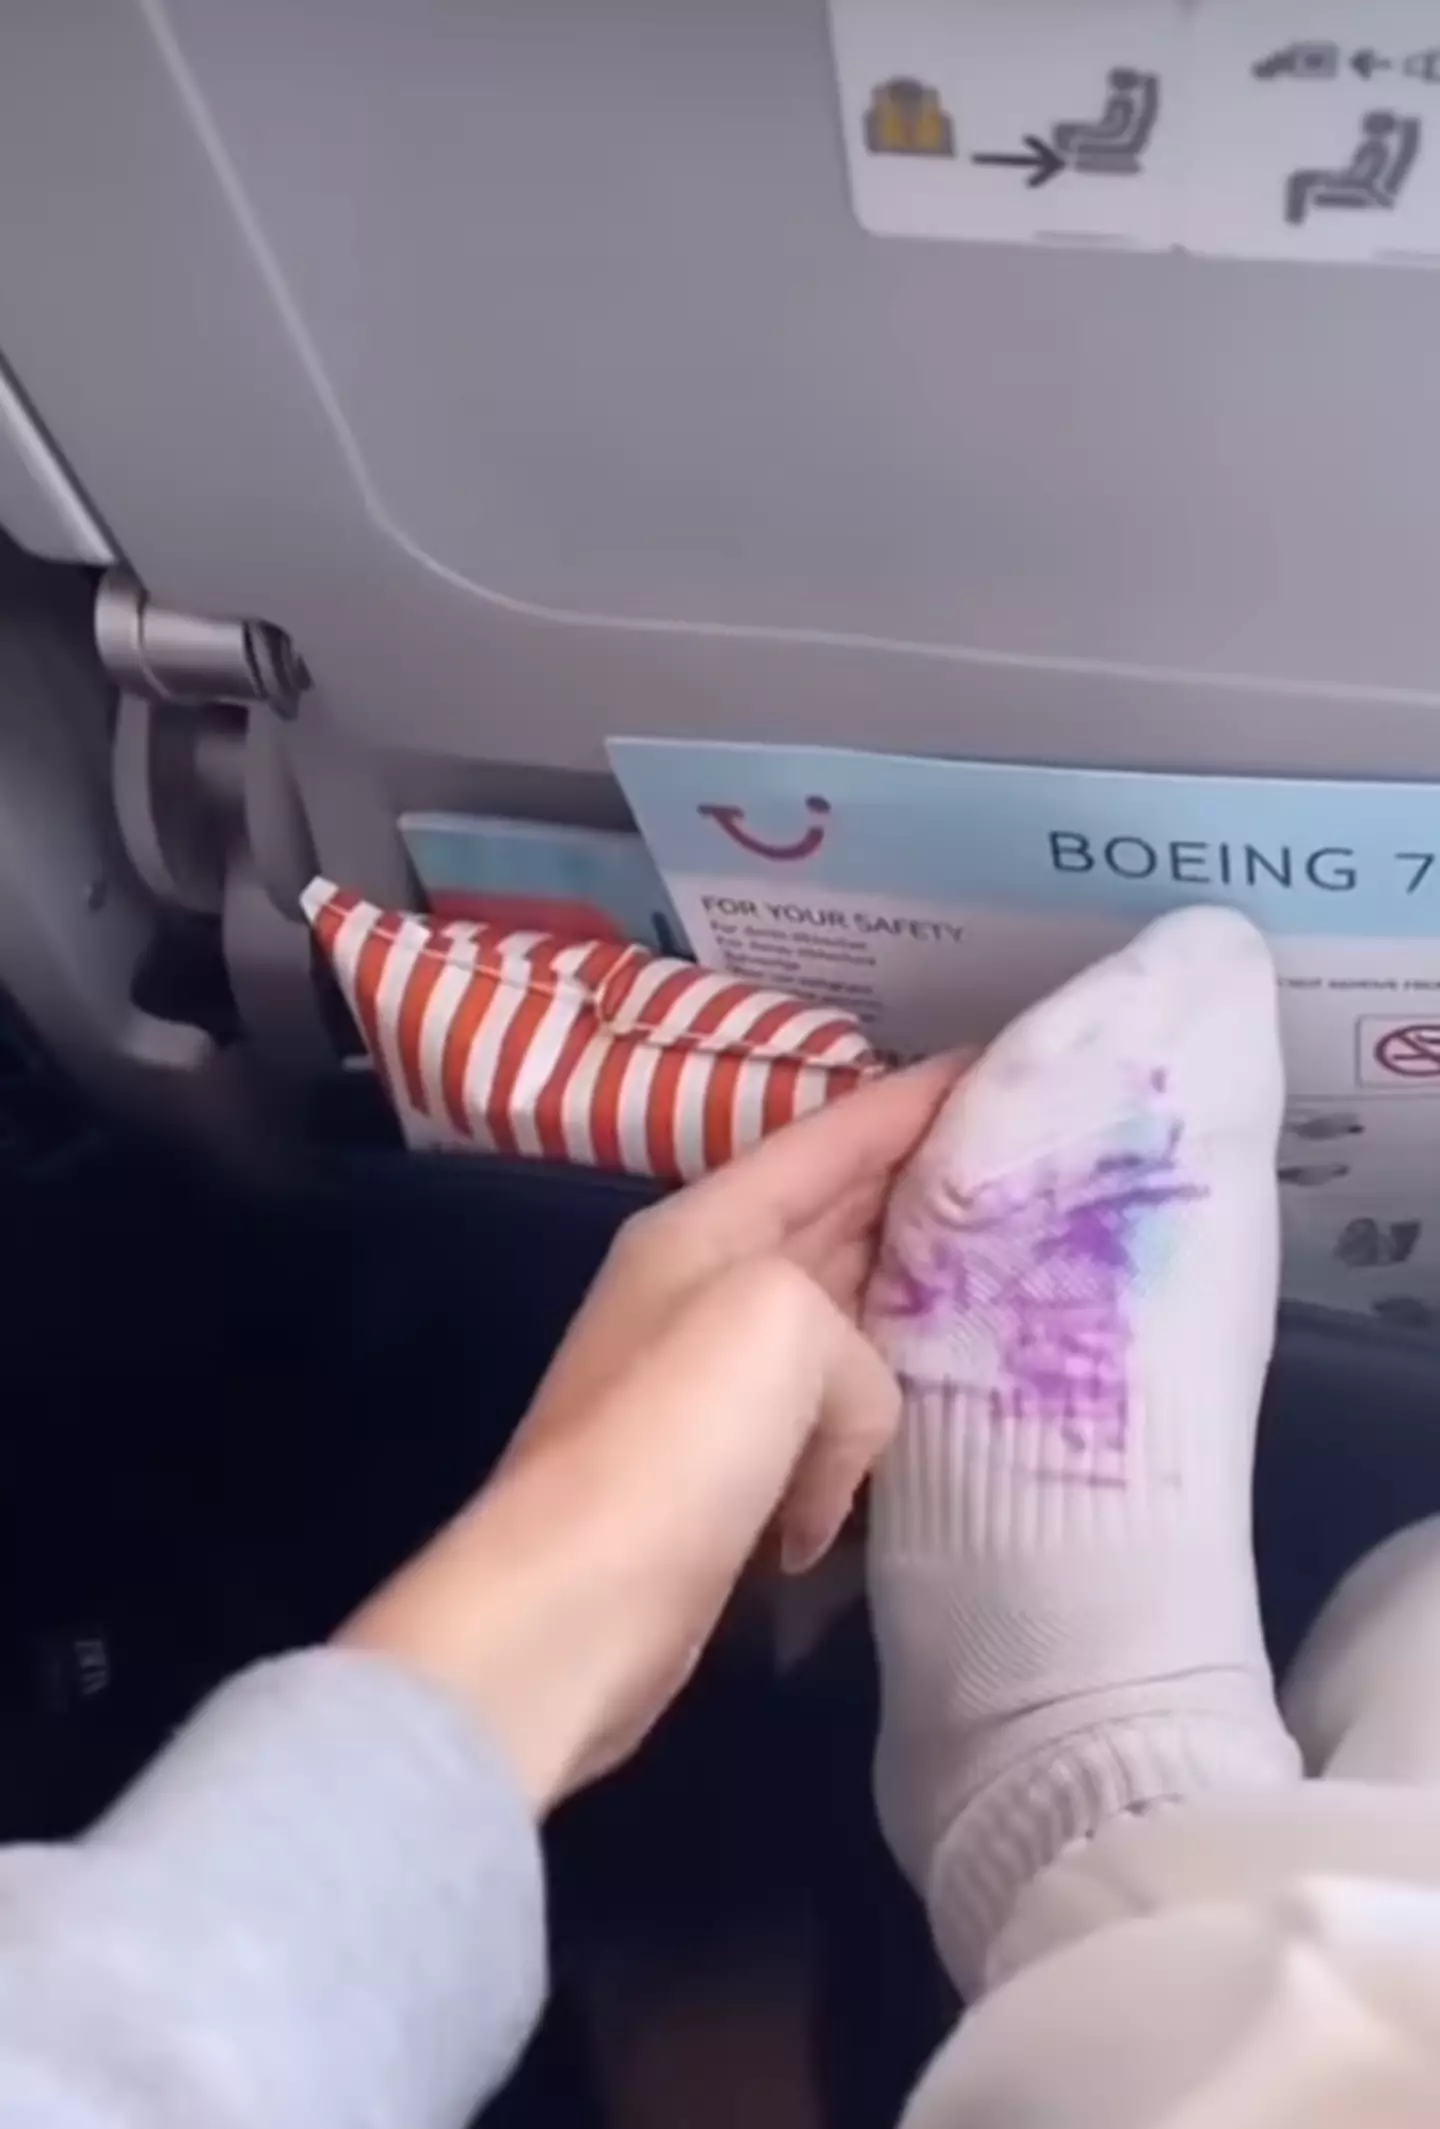 The woman was shocked when the child drew on her sock.